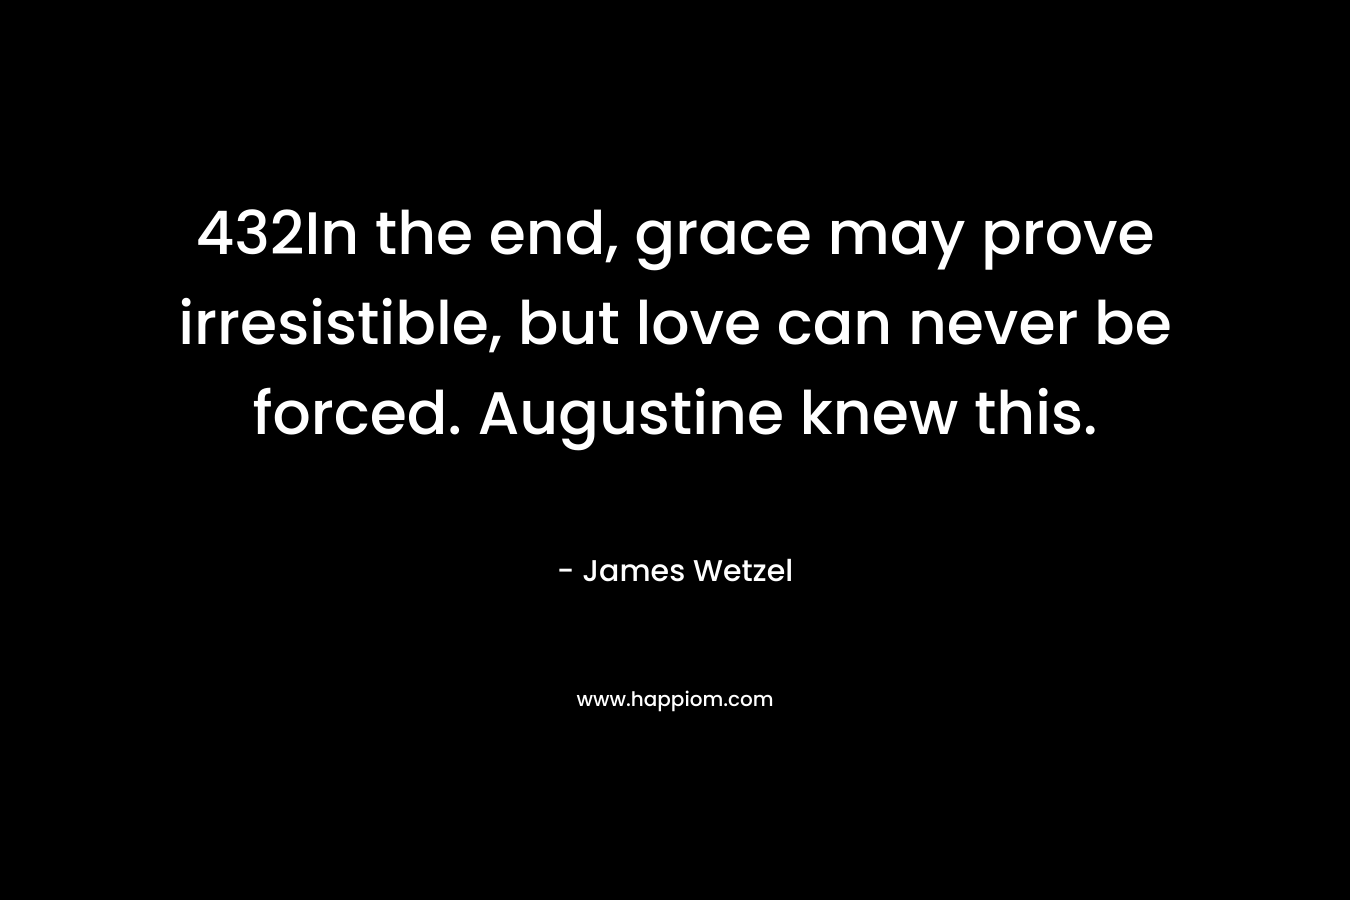 432In the end, grace may prove irresistible, but love can never be forced. Augustine knew this. – James Wetzel